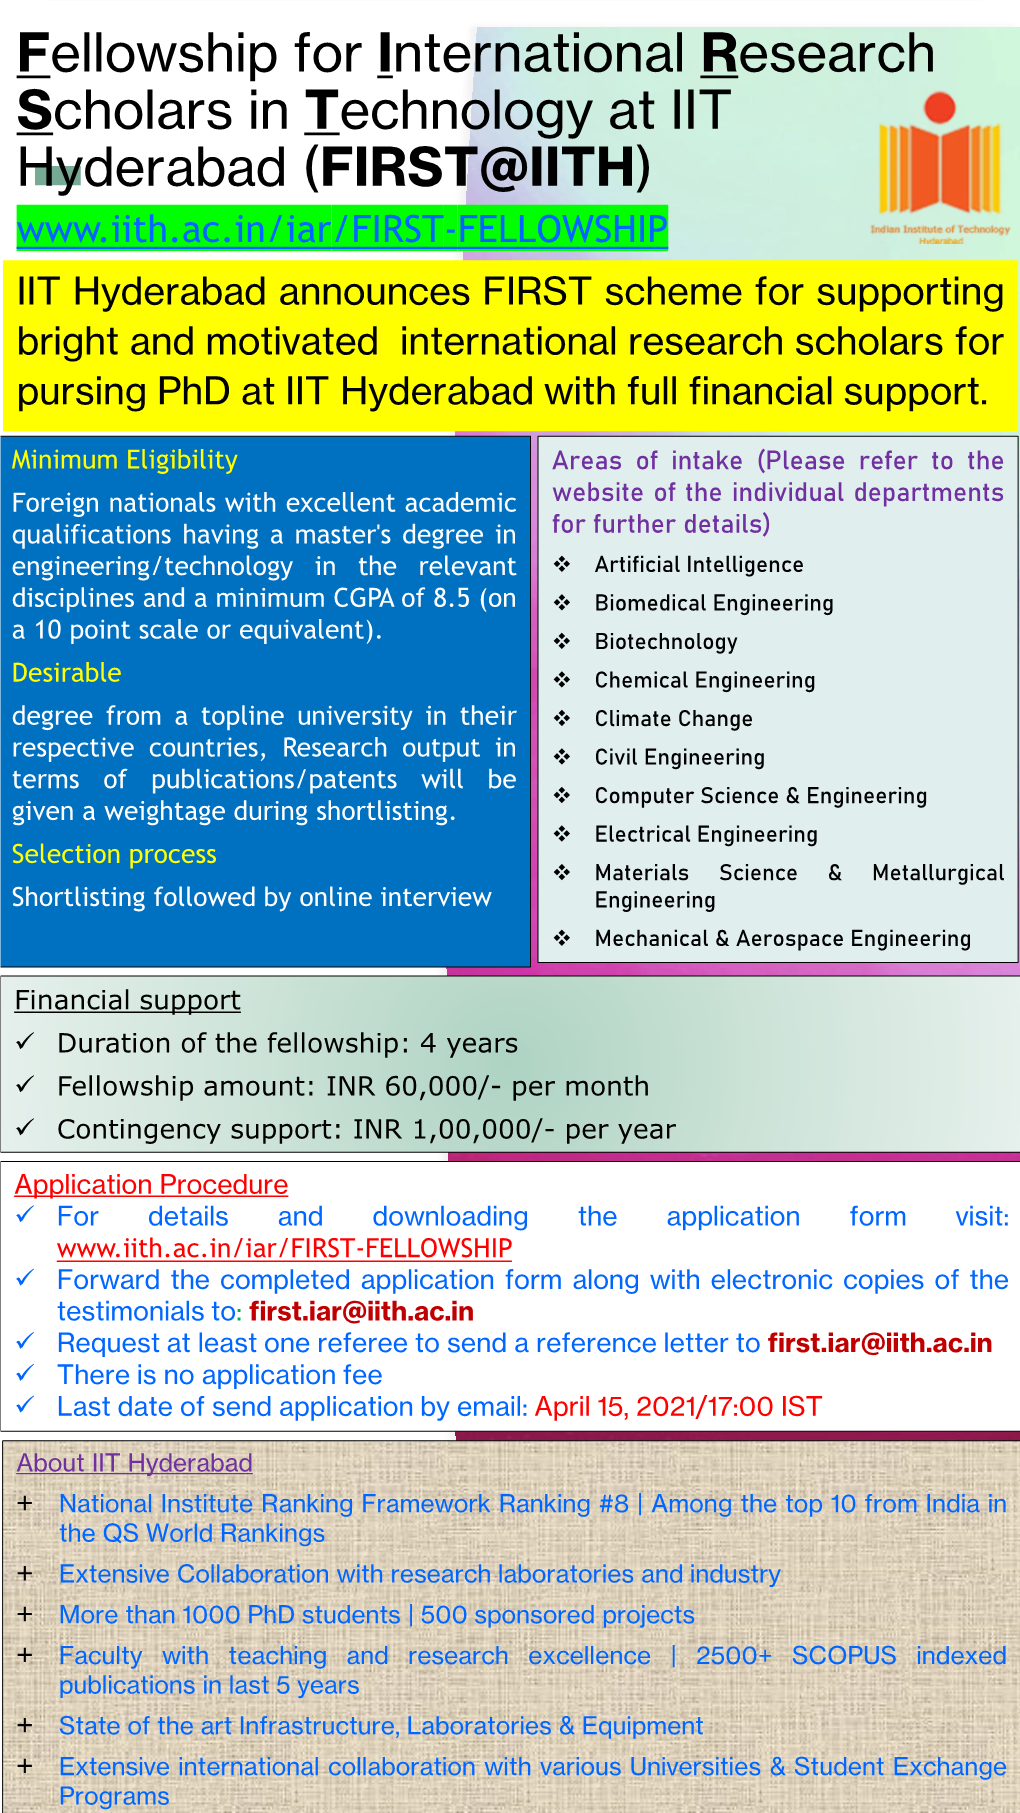 Fellowship for International Research Scholars in Technology at IIT